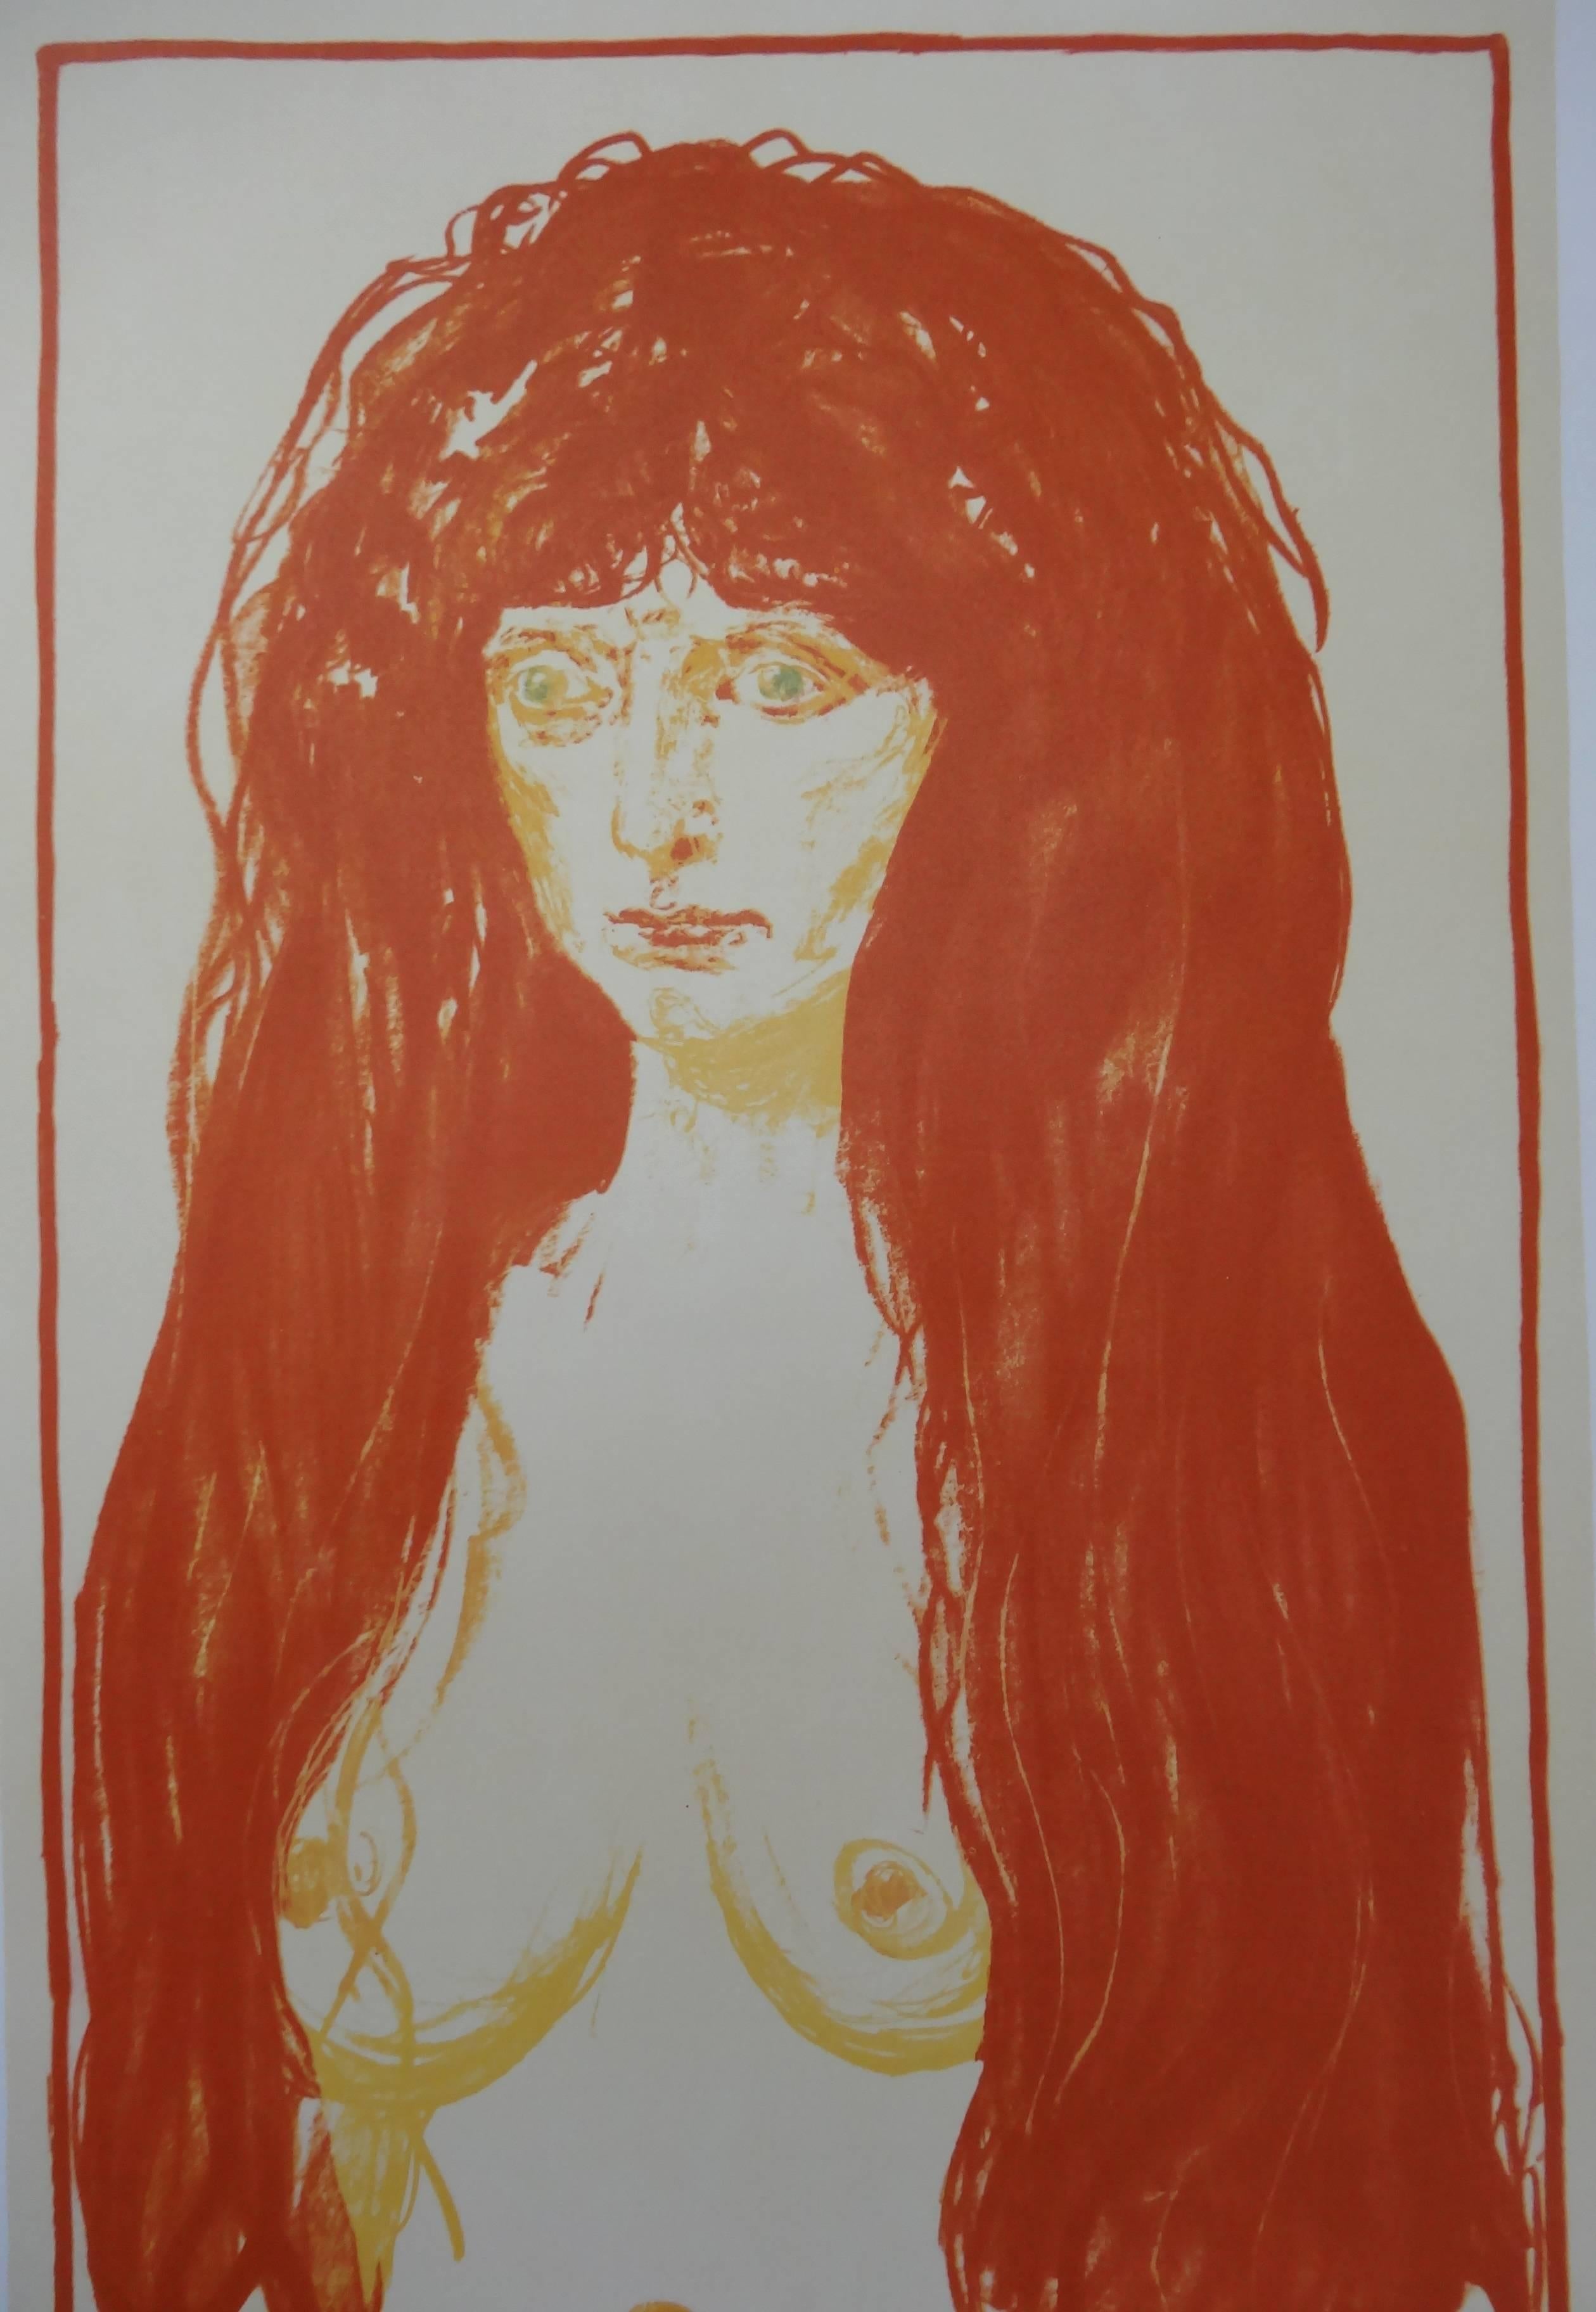 Redhead Woman - Exhibition Poster - Los Angeles County Museum (MOURLOT) - Print by Edvard Munch